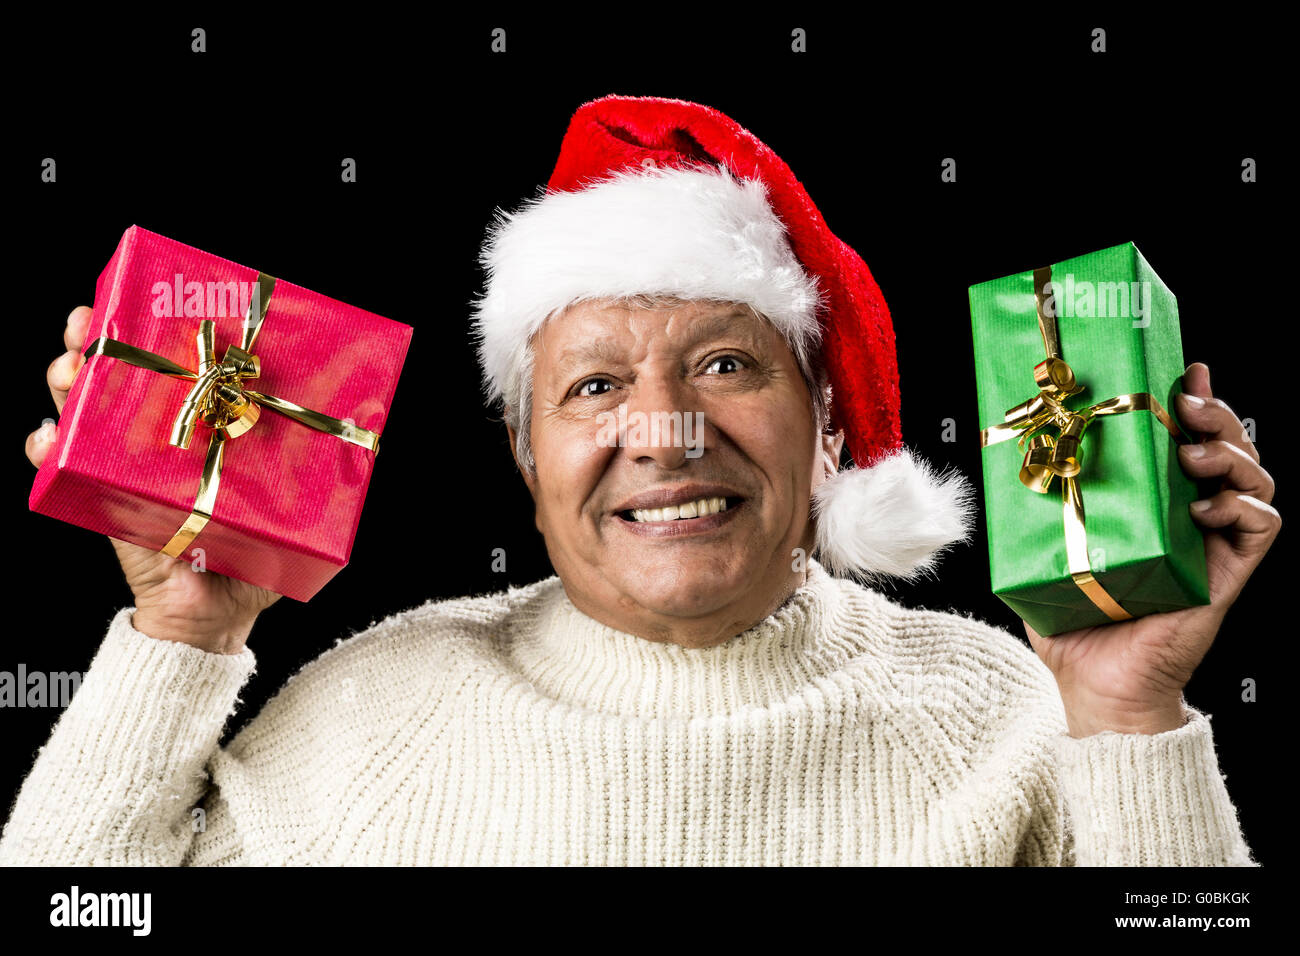 Poignant Aged Man Showing Red And Green Xmas Gifts Stock Photo